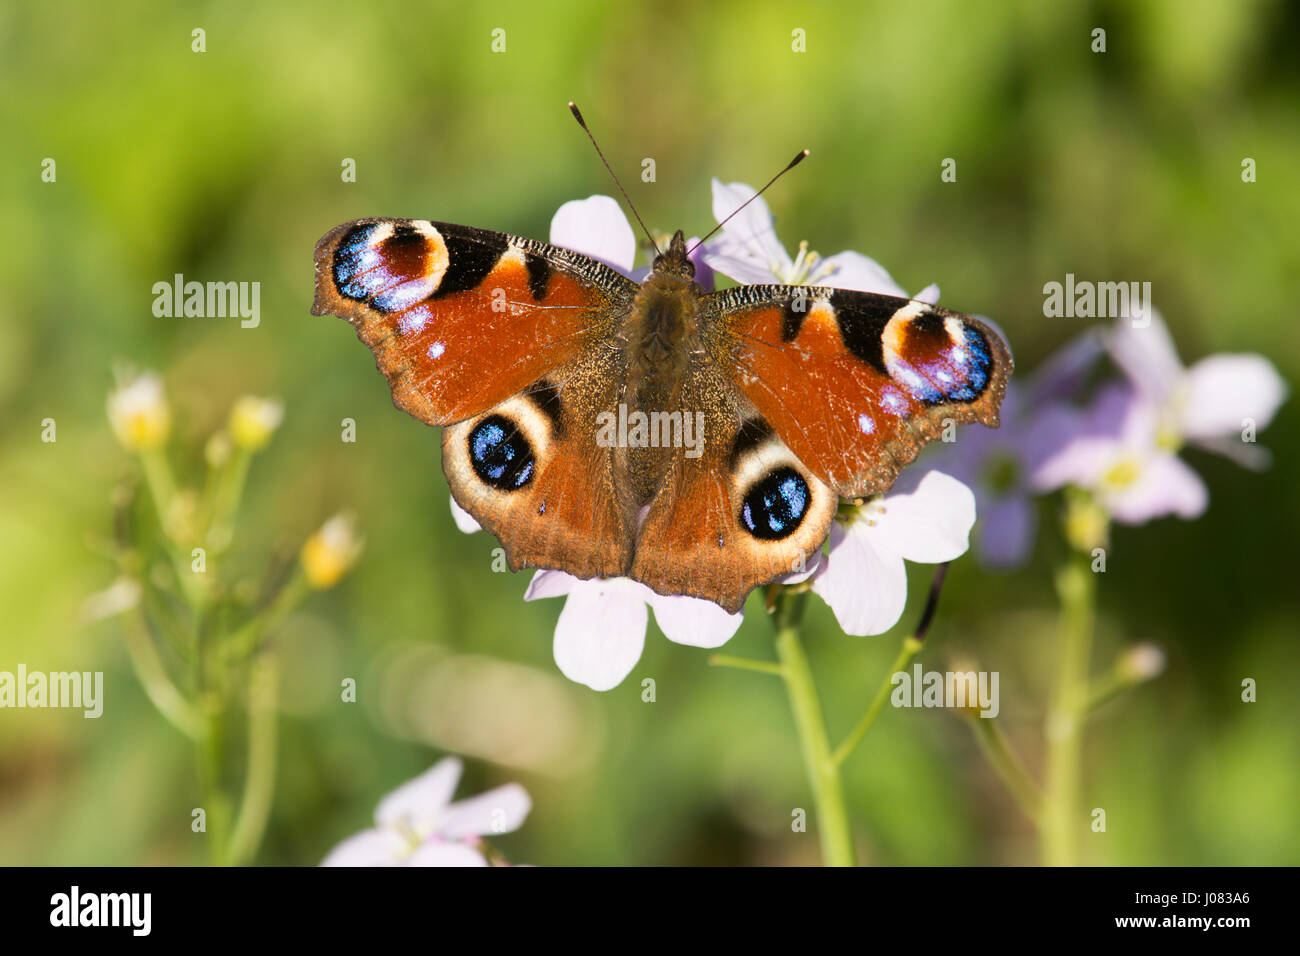 Peacock butterfly, Inachis io, Aglais io, on Cuckoo flower, Lady's-smock, Cardamine pratensis, Sussex, April Stock Photo